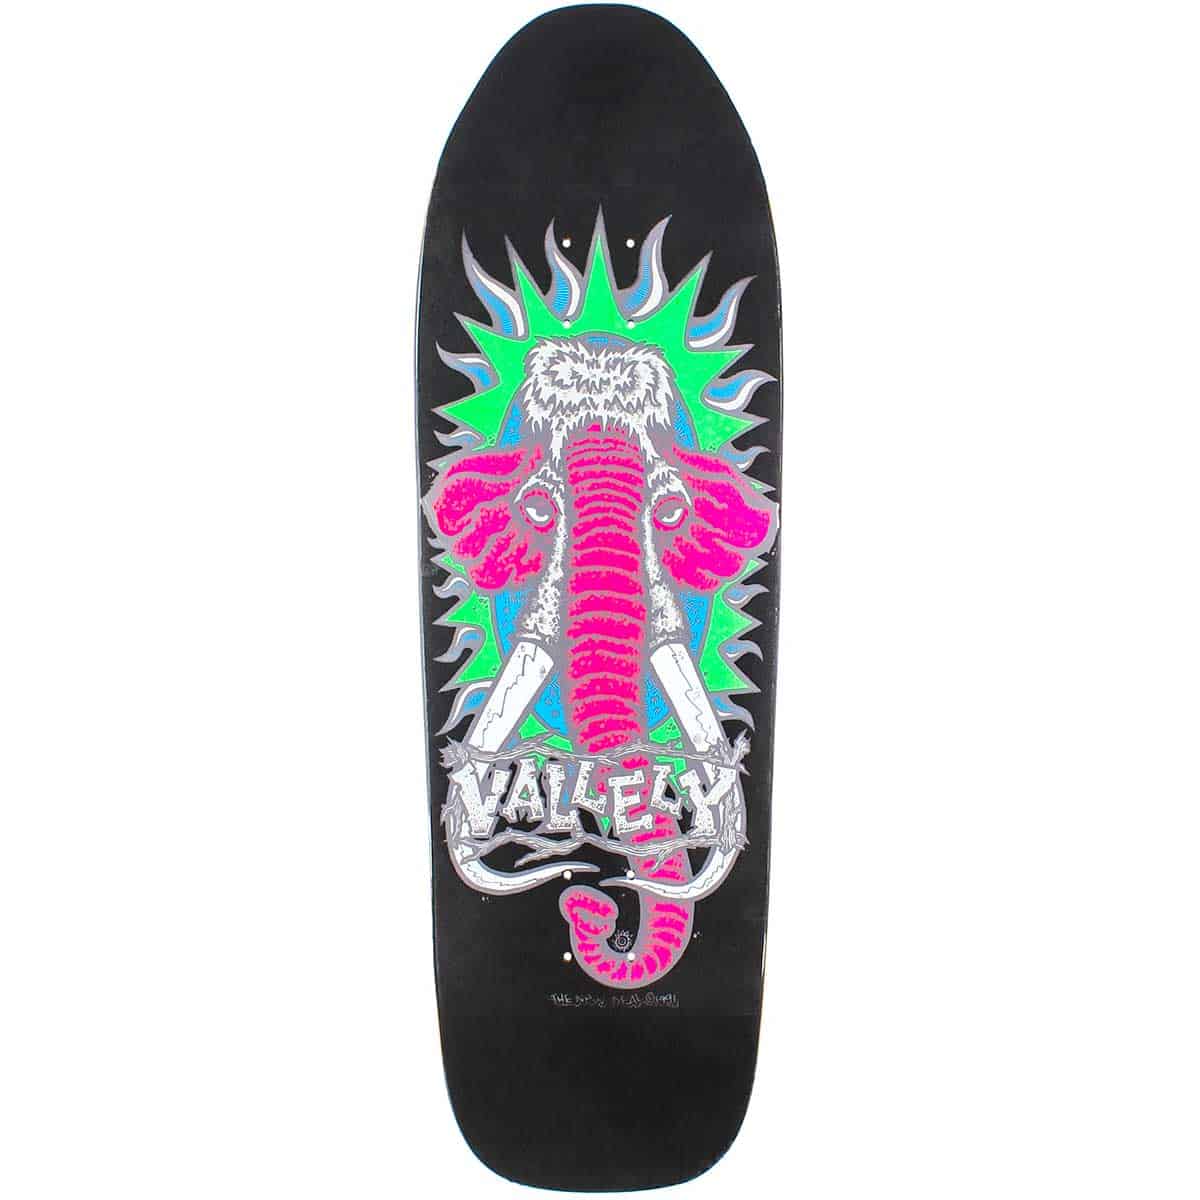 New Deal Vallely Mammoth SP Deck Neon 9.5